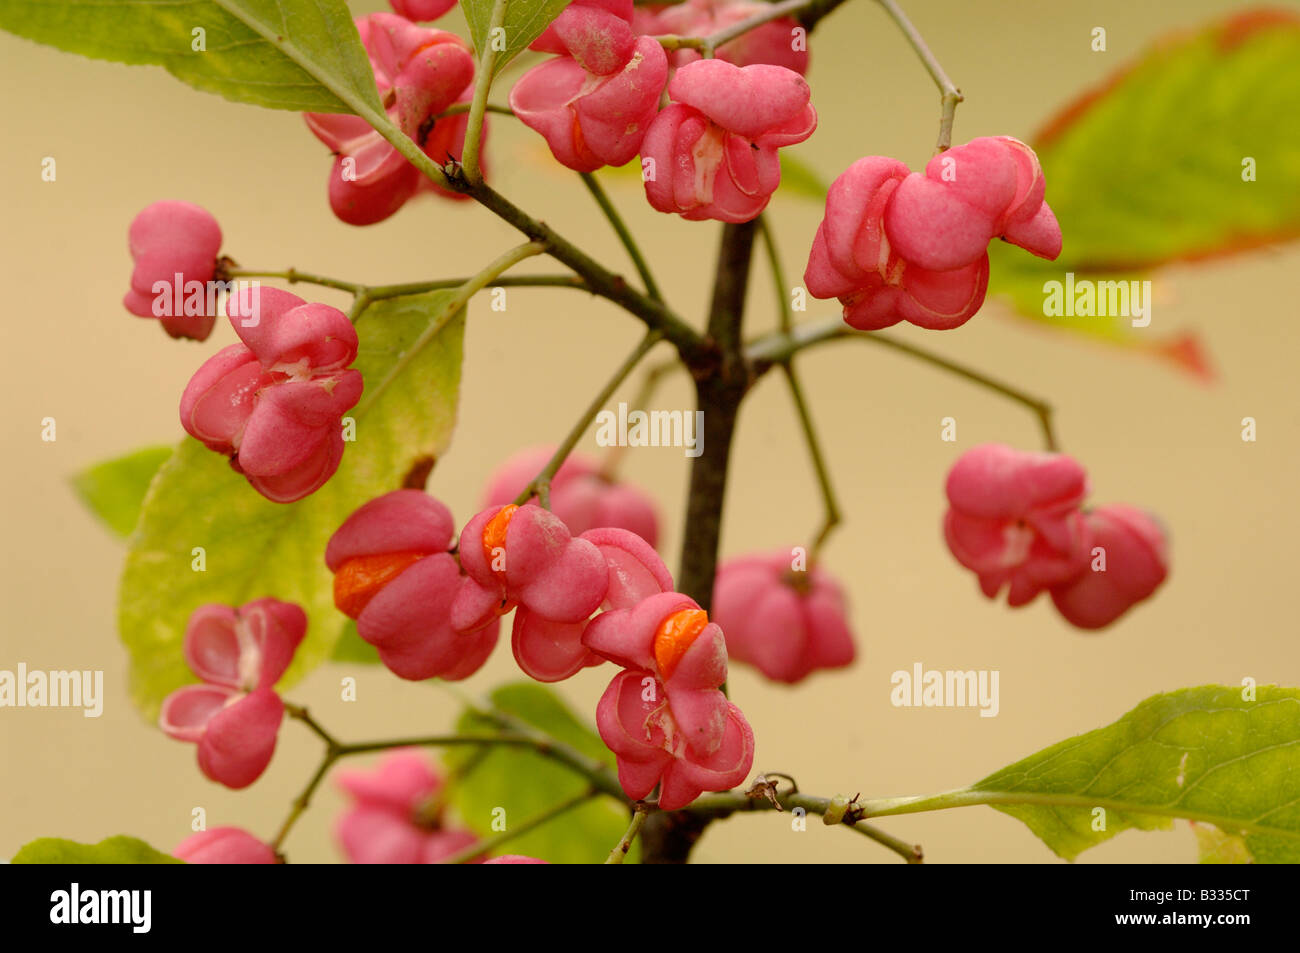 Spindle Tree Euonymus europaeus, berries, Photographed in England Stock Photo